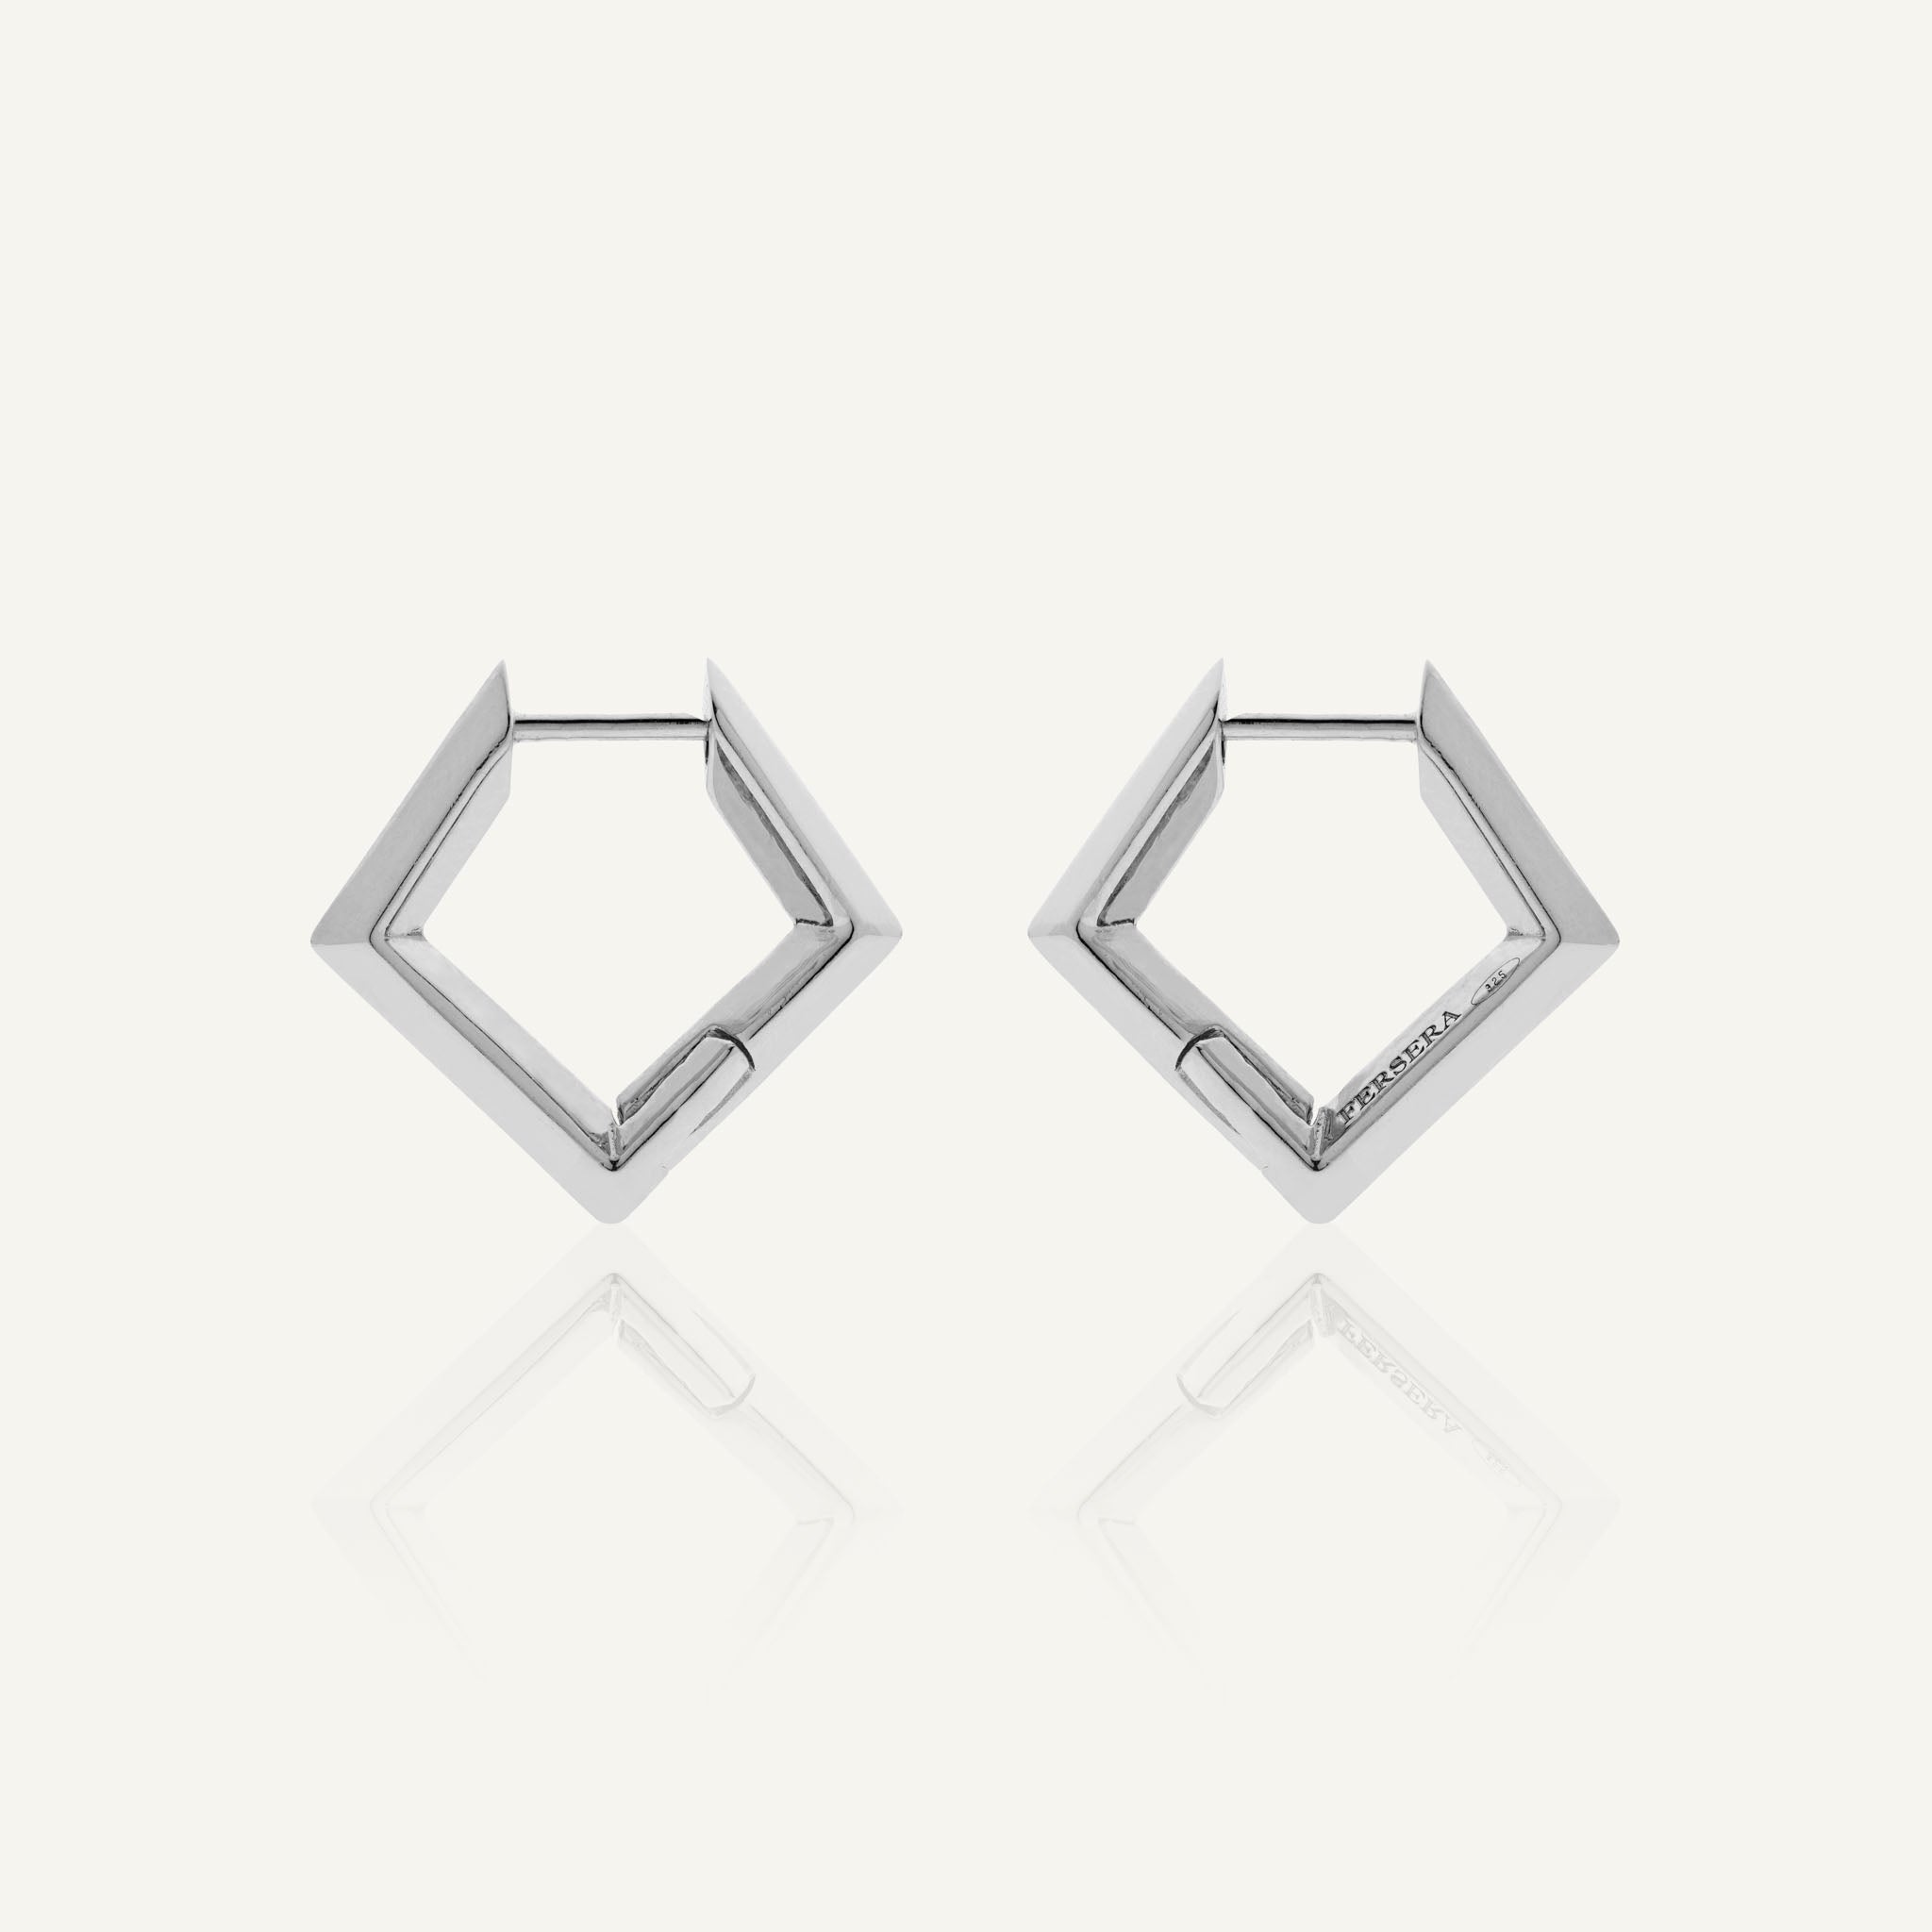 Sculptura Square Earrings (Silver)